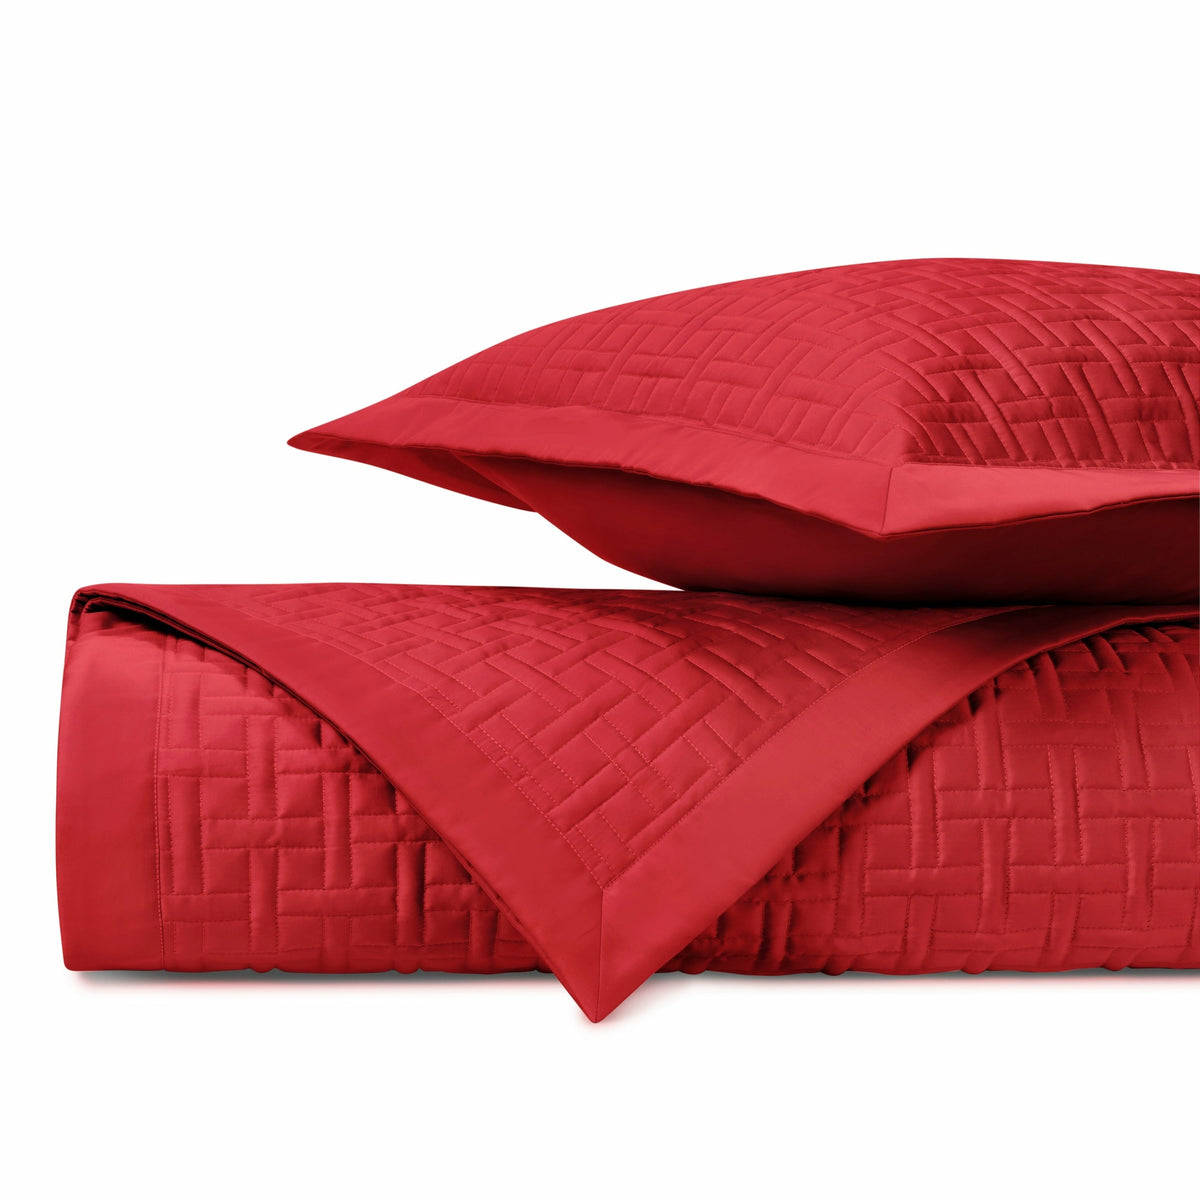 Home Treasures Parquet Quilted Bedding Bright Red Fine Linens